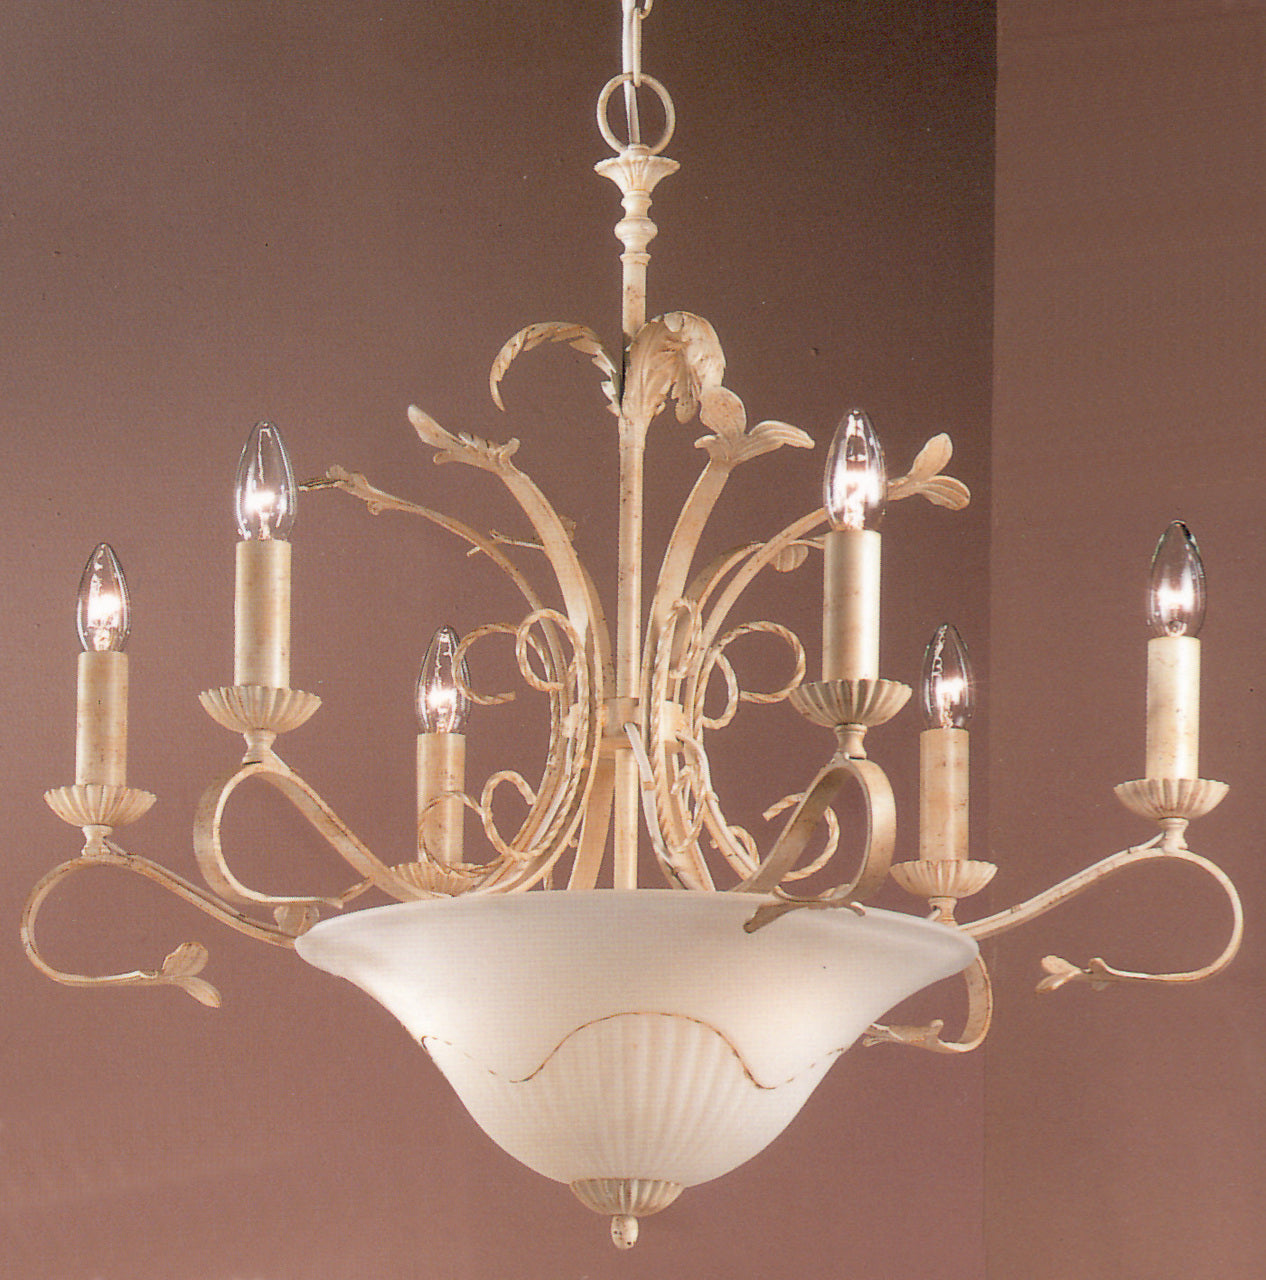 Classic Lighting 4118 I Treviso Wrought Iron Chandelier in Ivory (Imported from Italy)